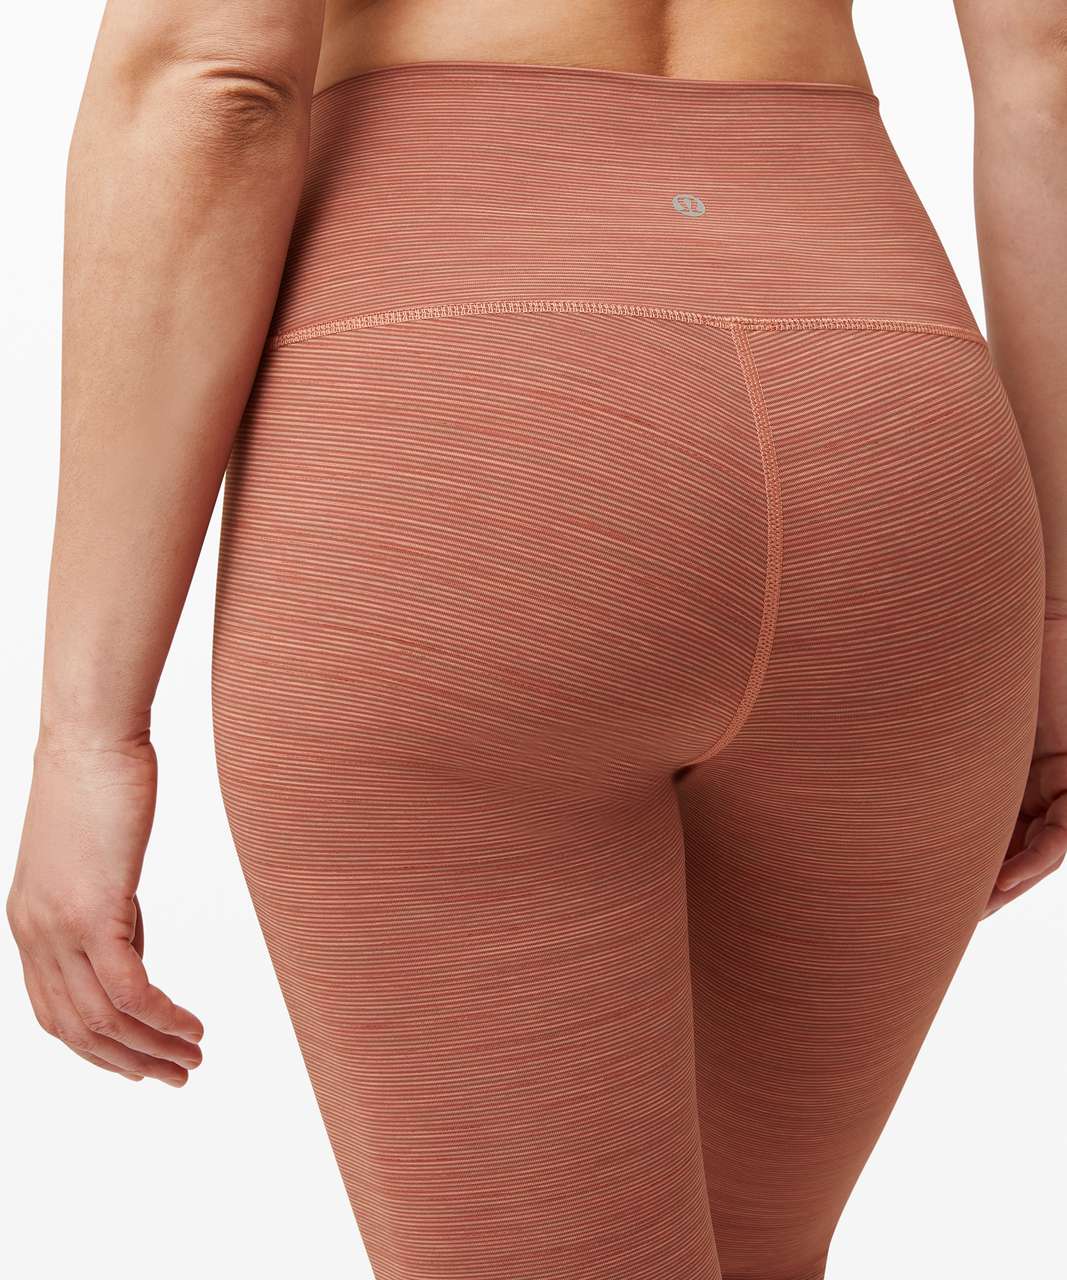 Lululemon Wunder Under High-Rise Tight 25 *Full-On Luxtreme Rustic Cora…